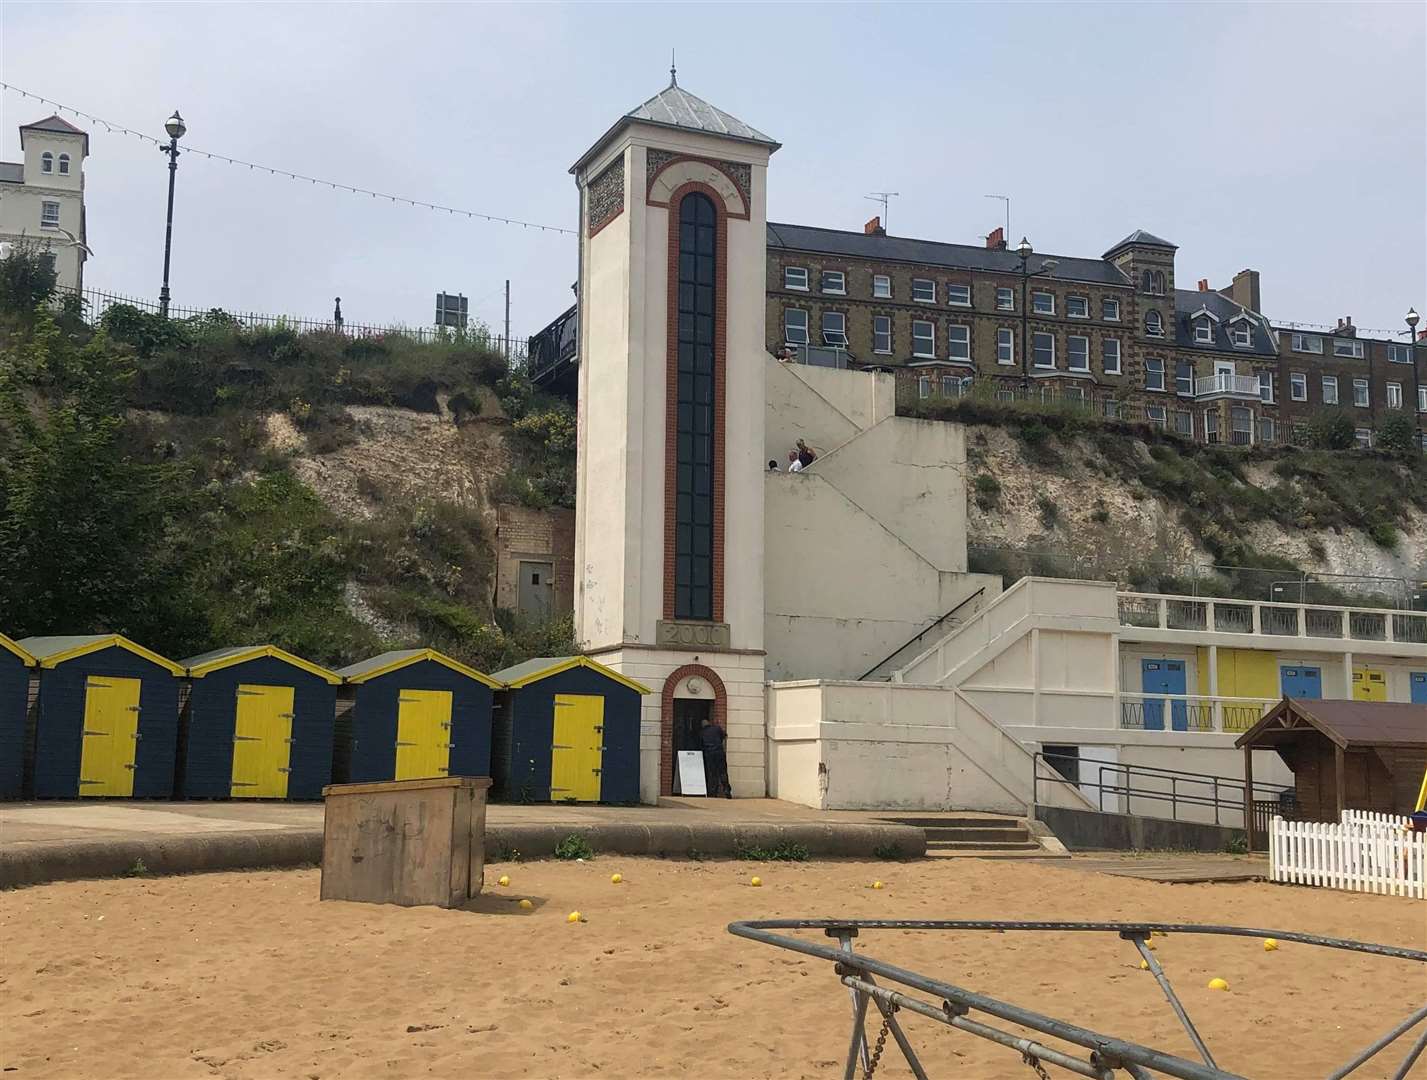 The Viking Bay lift in Broadstairs